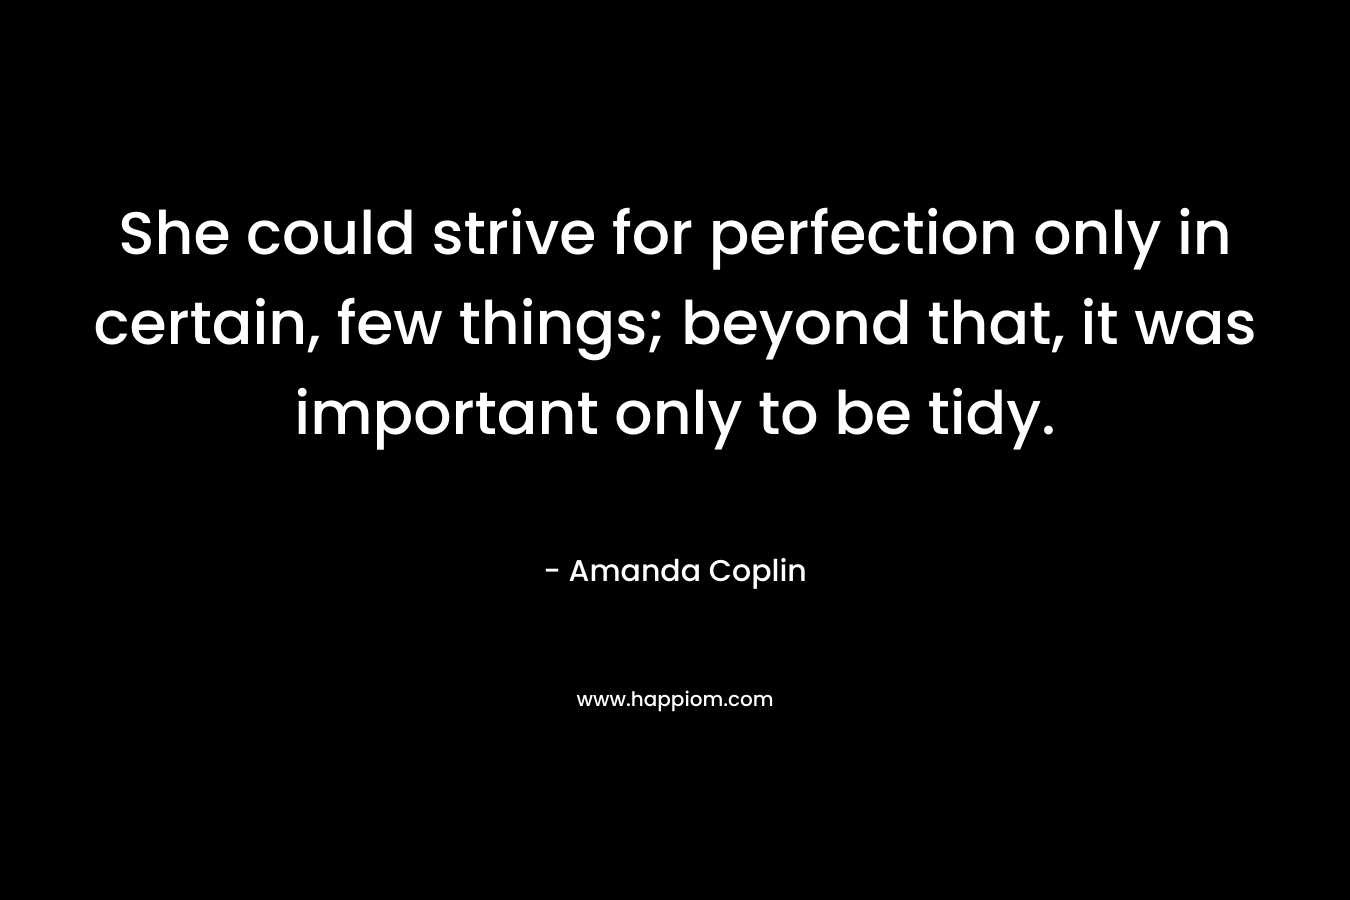 She could strive for perfection only in certain, few things; beyond that, it was important only to be tidy.